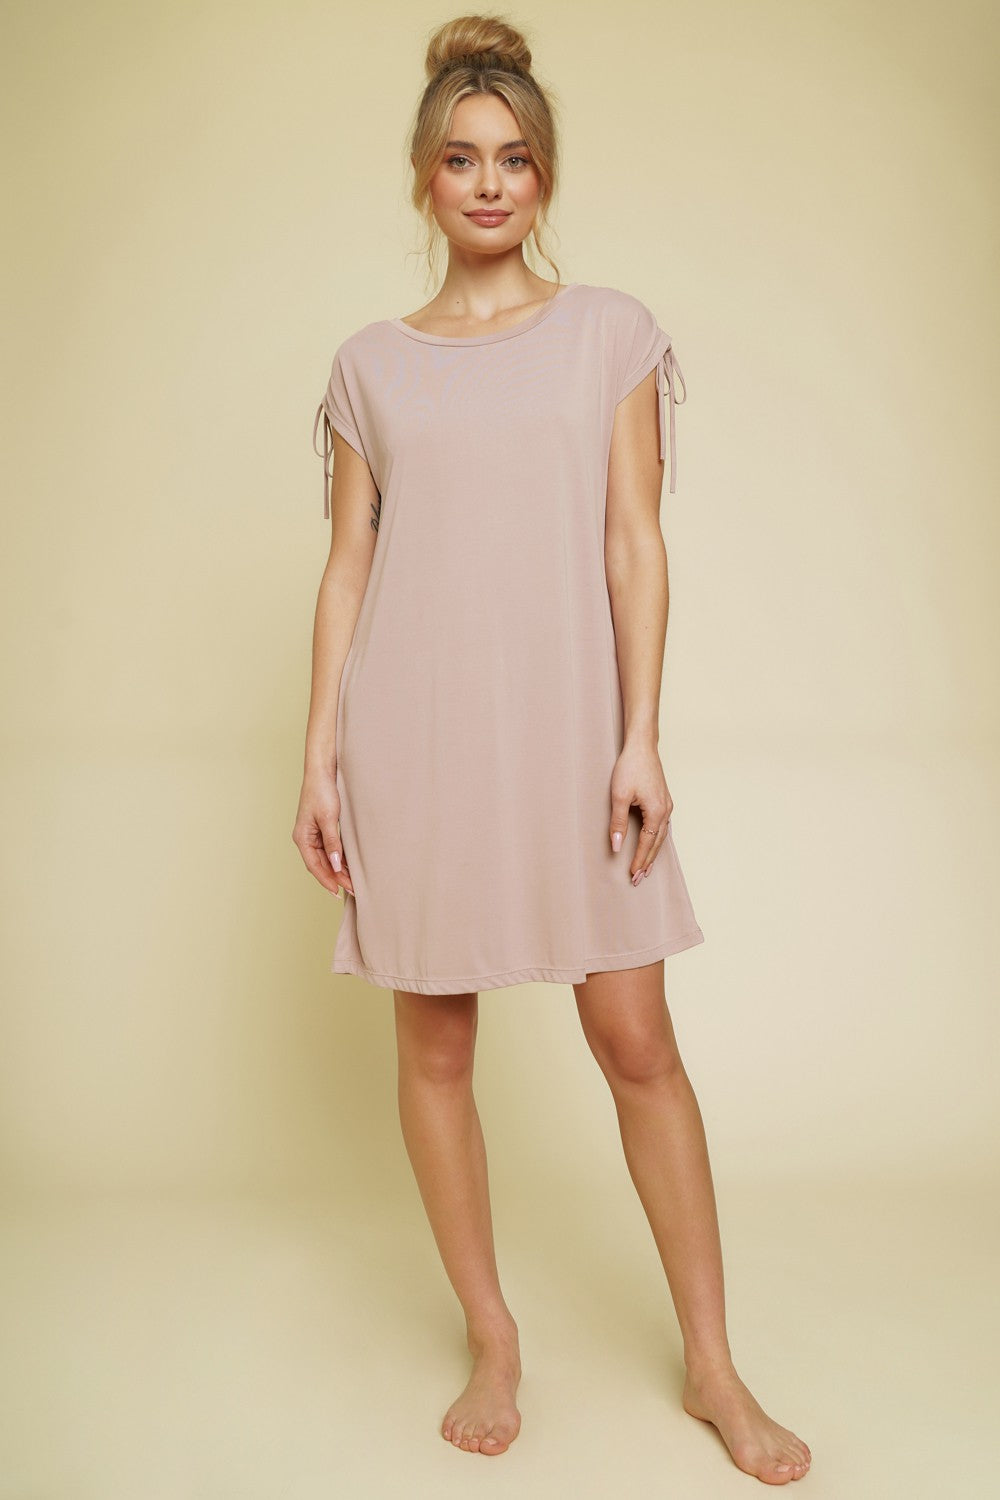 The String Detail Cozy Dress